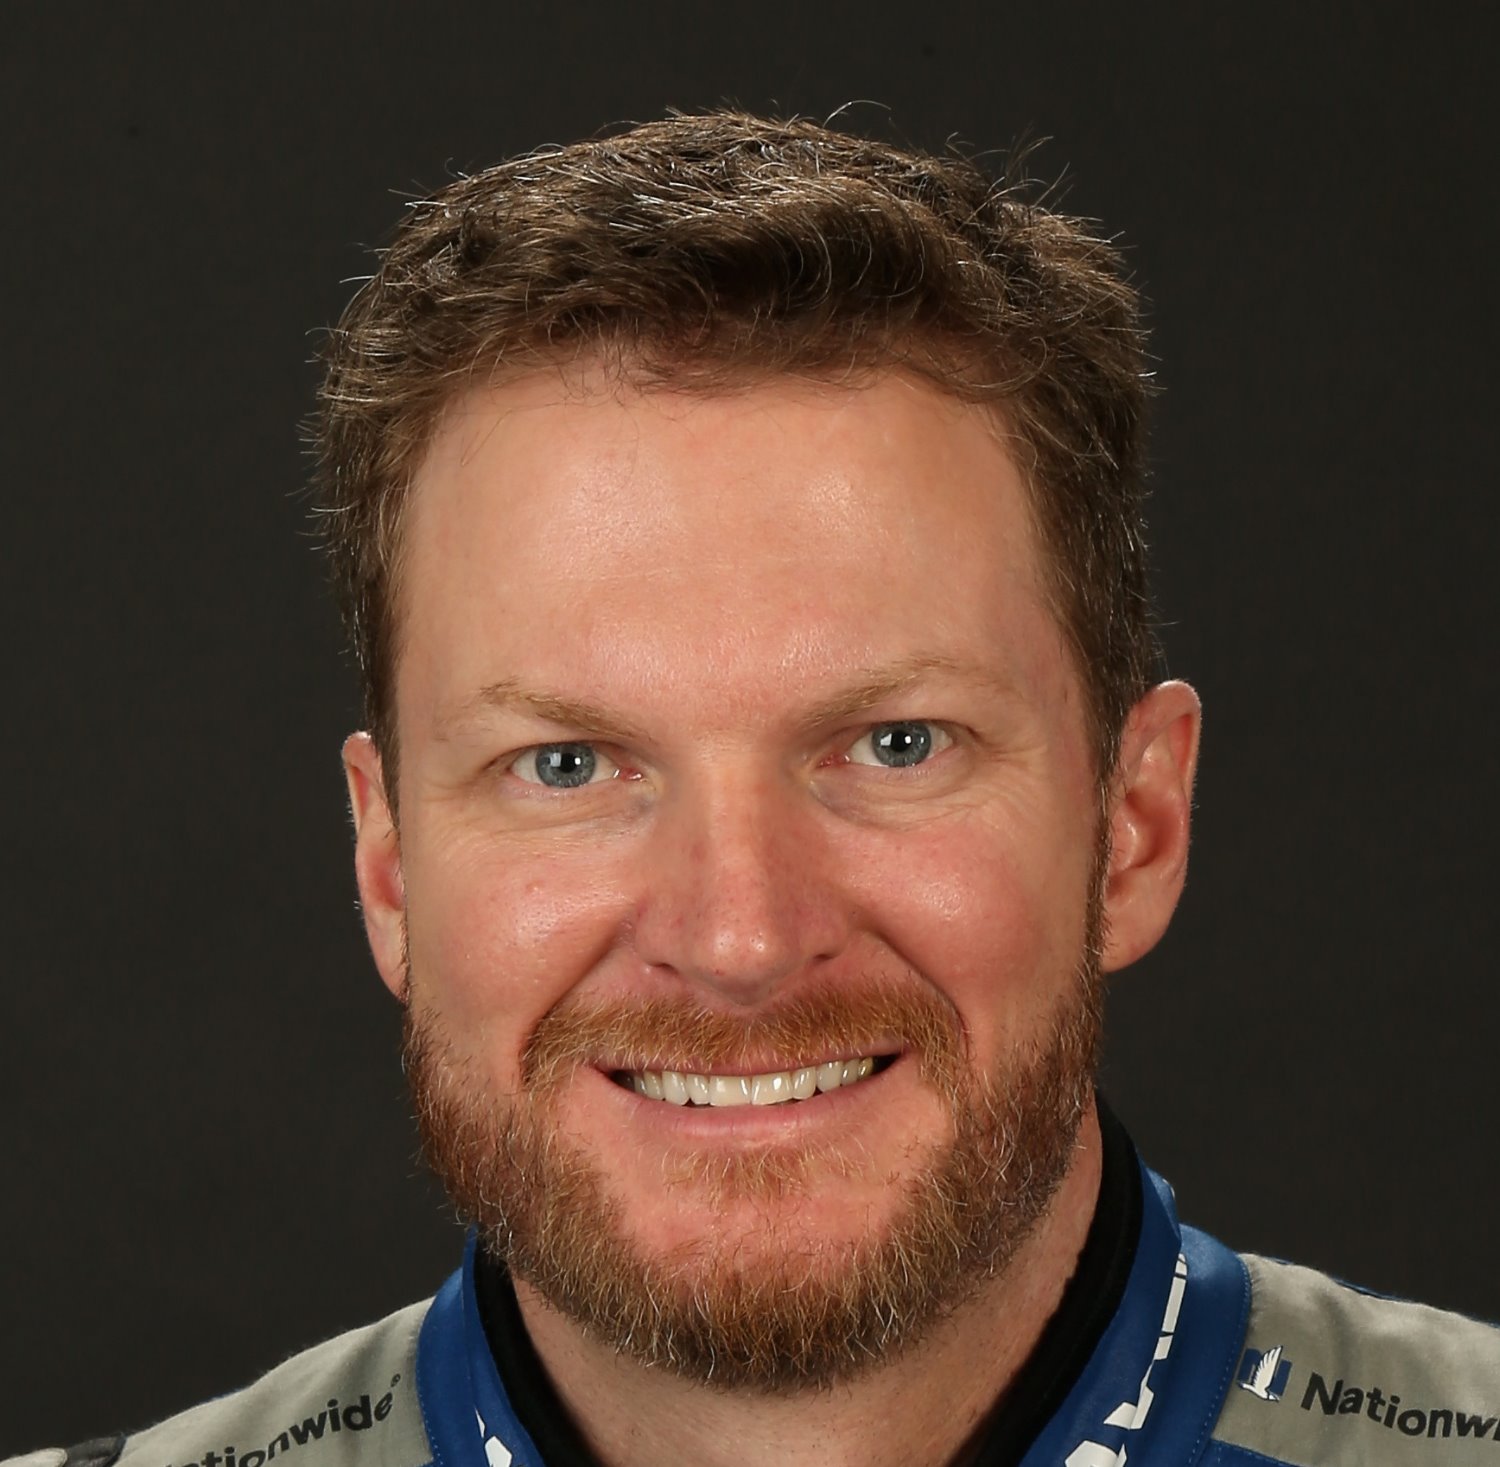 As long as Earnhardt, Jr. remains in the sport, it will remain popular. Even he may not be capable of keeping it going at present levels.